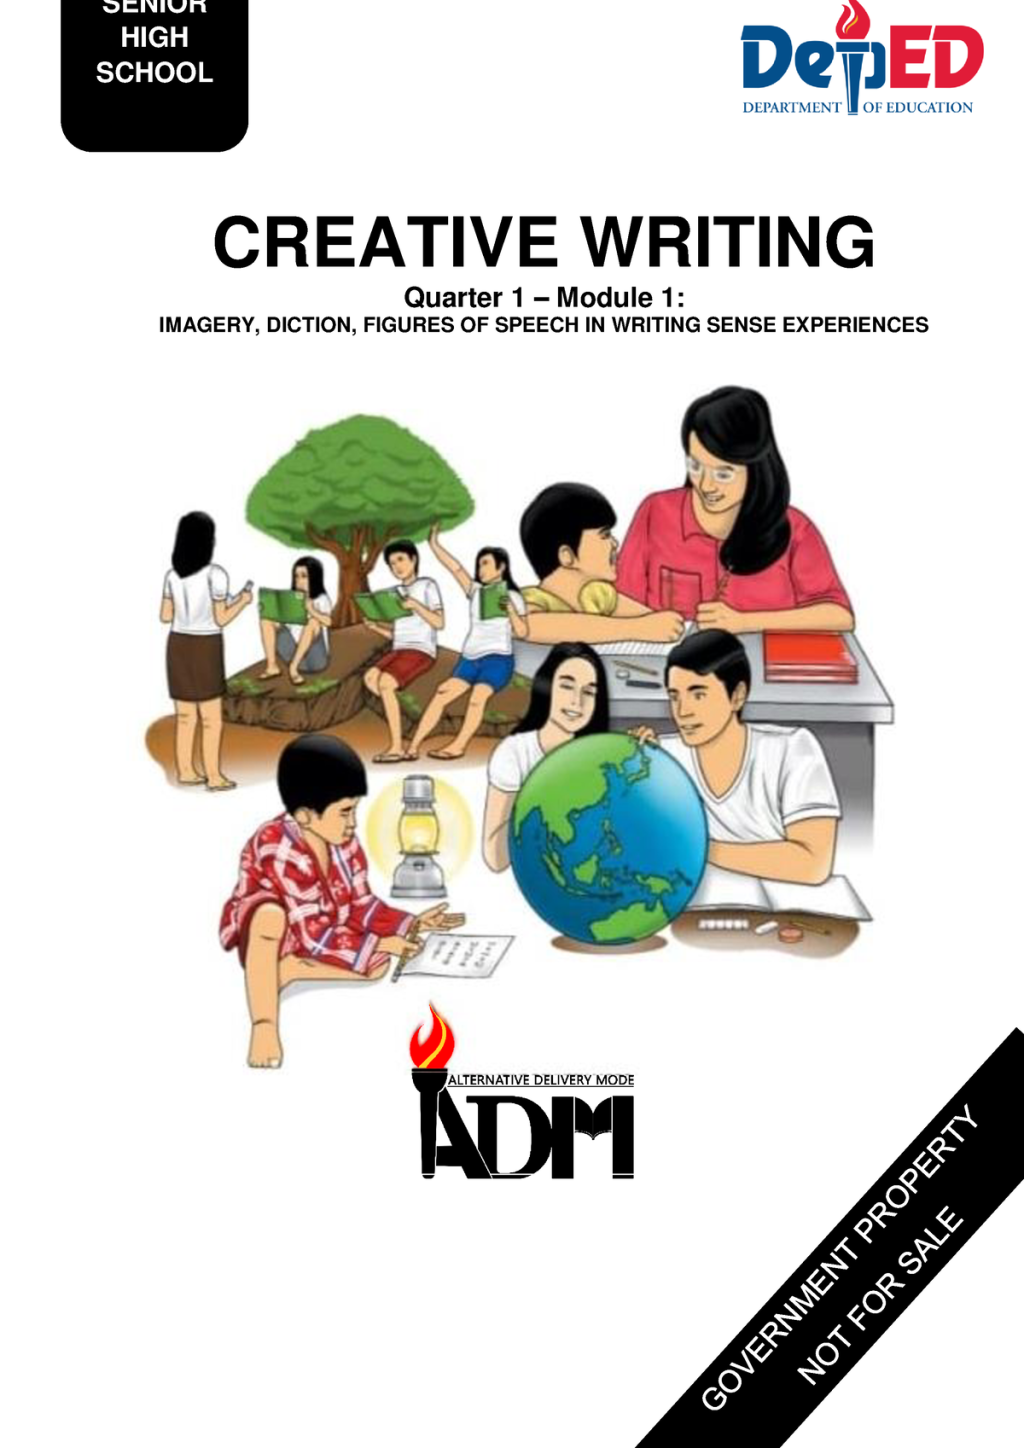 Picture of: Creative Writing Module  Lessons ,, and  – SENIOR HIGH SCHOOL